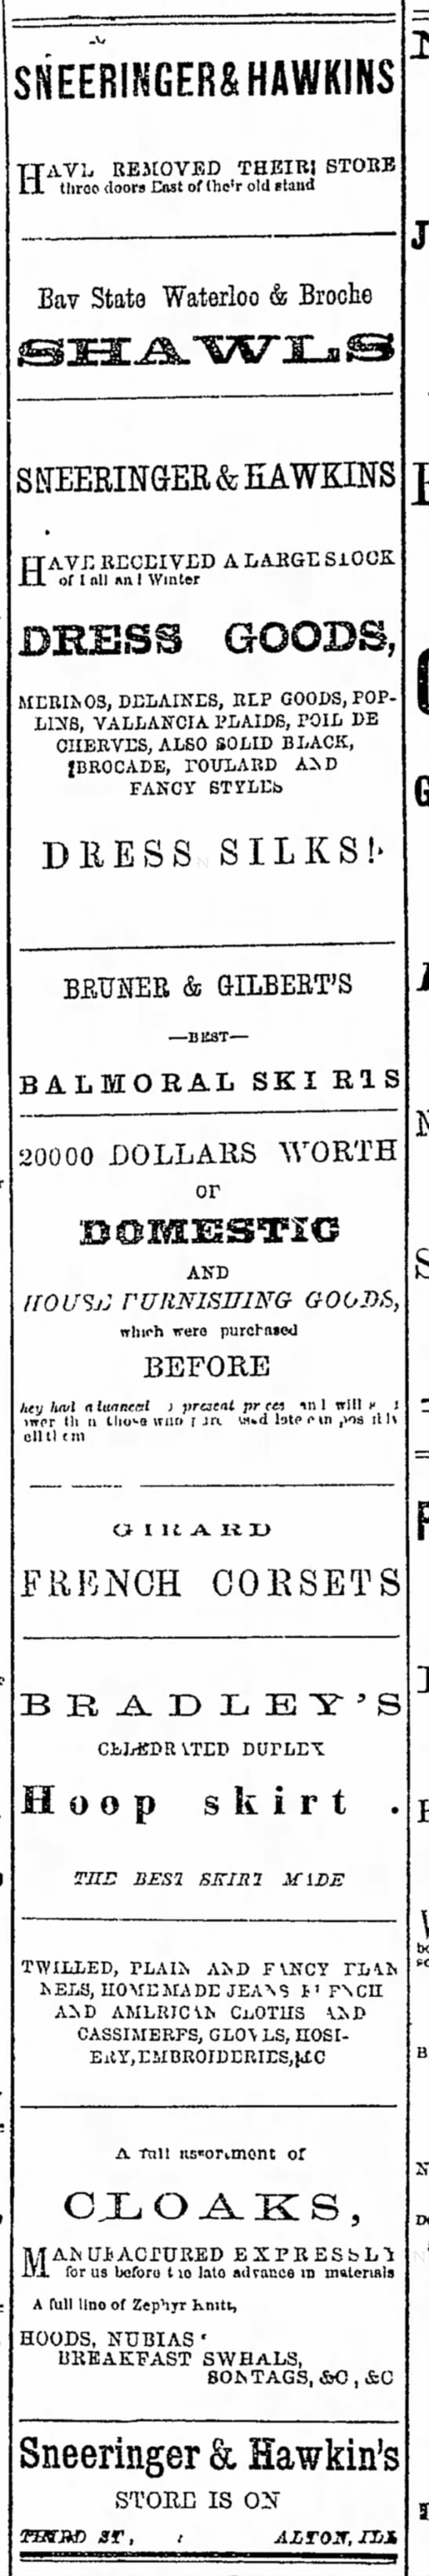 Ad for corsets, hoop skirts, and other items; Illinois 1865 - 